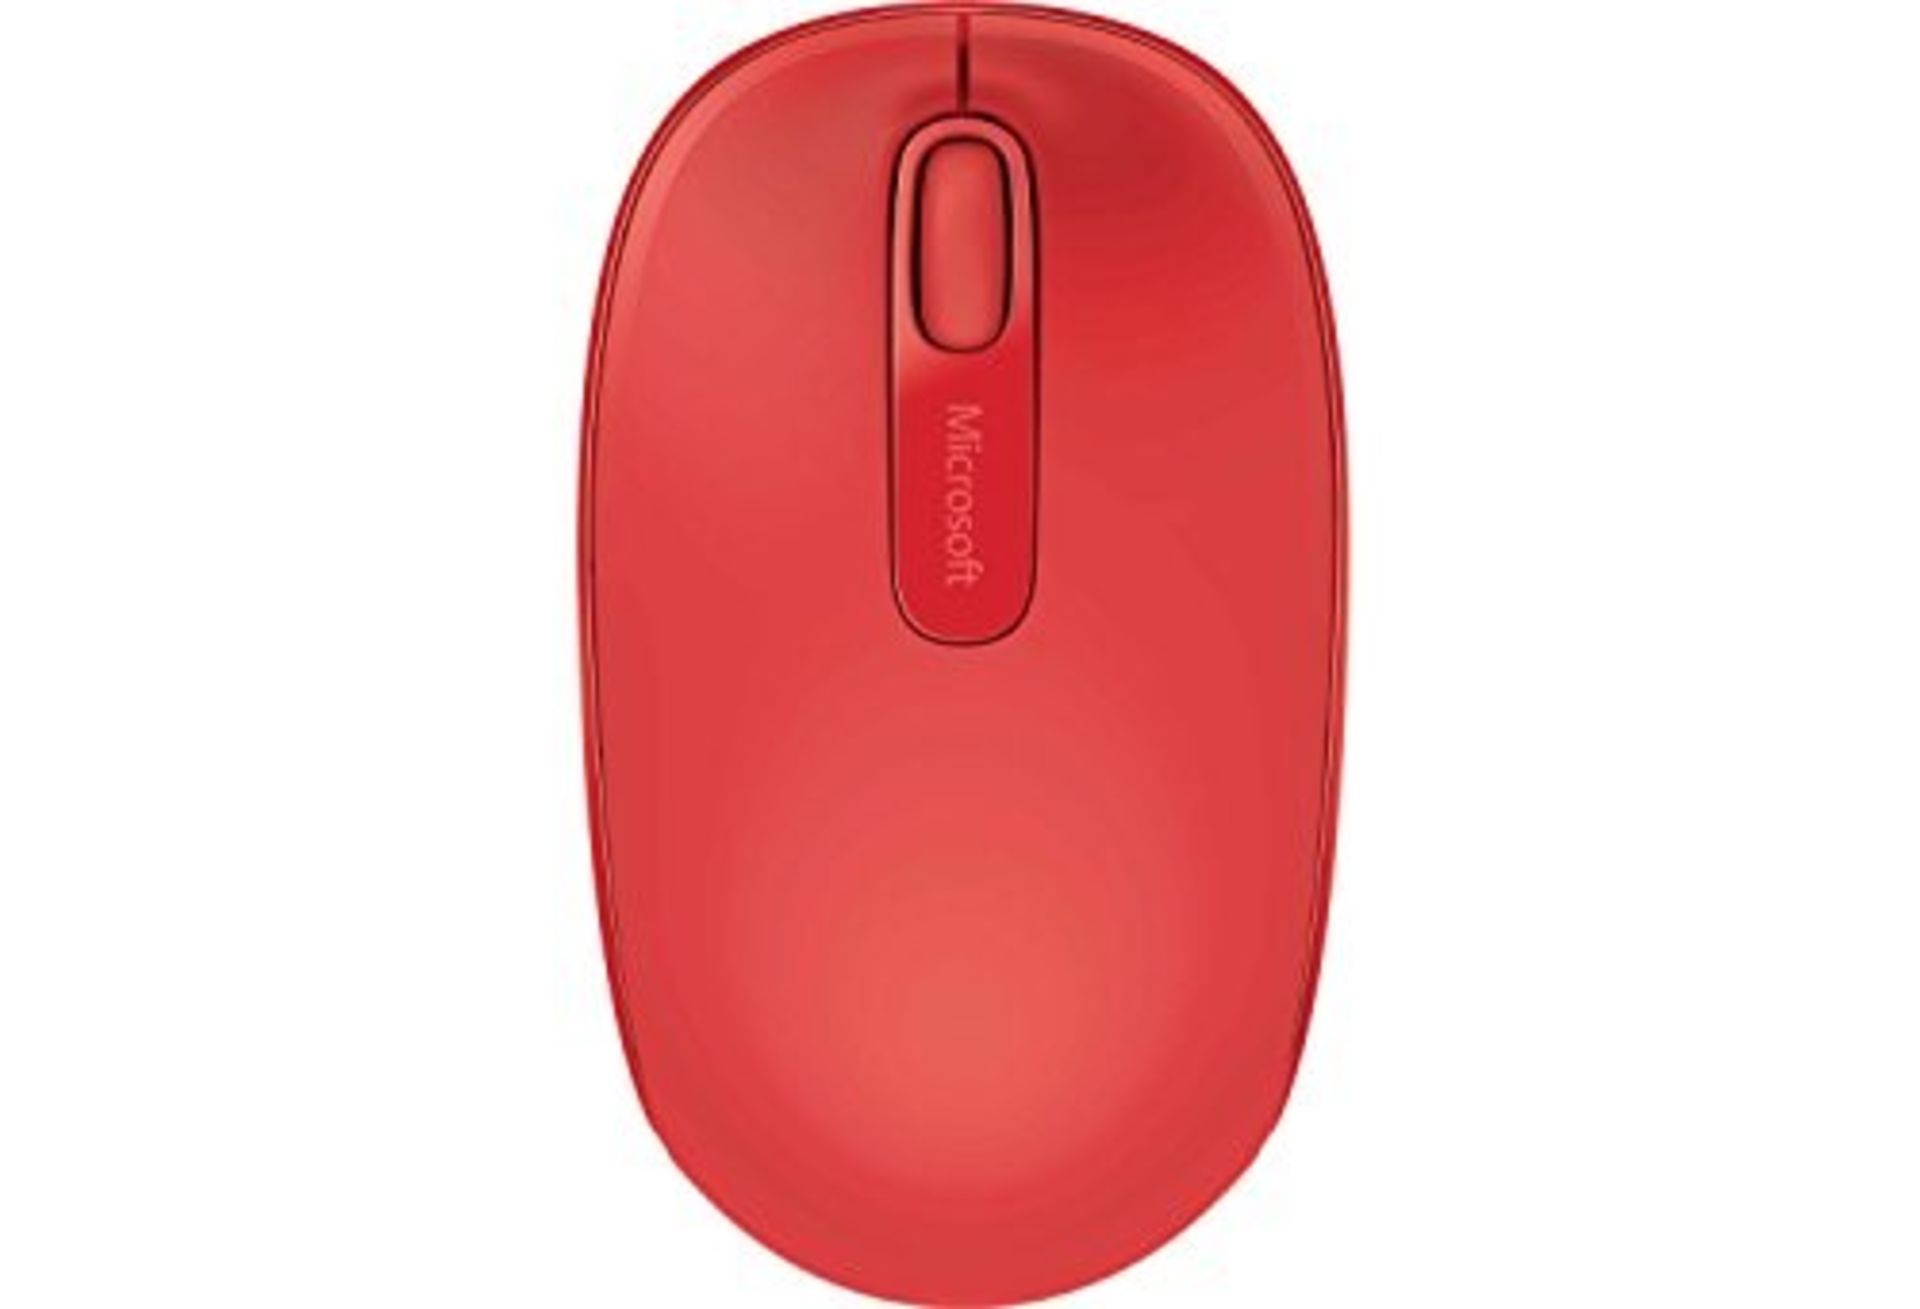 Microsoft 1850 3 Button Wireless Mobile Mouse - Flame Red - Image 2 of 4